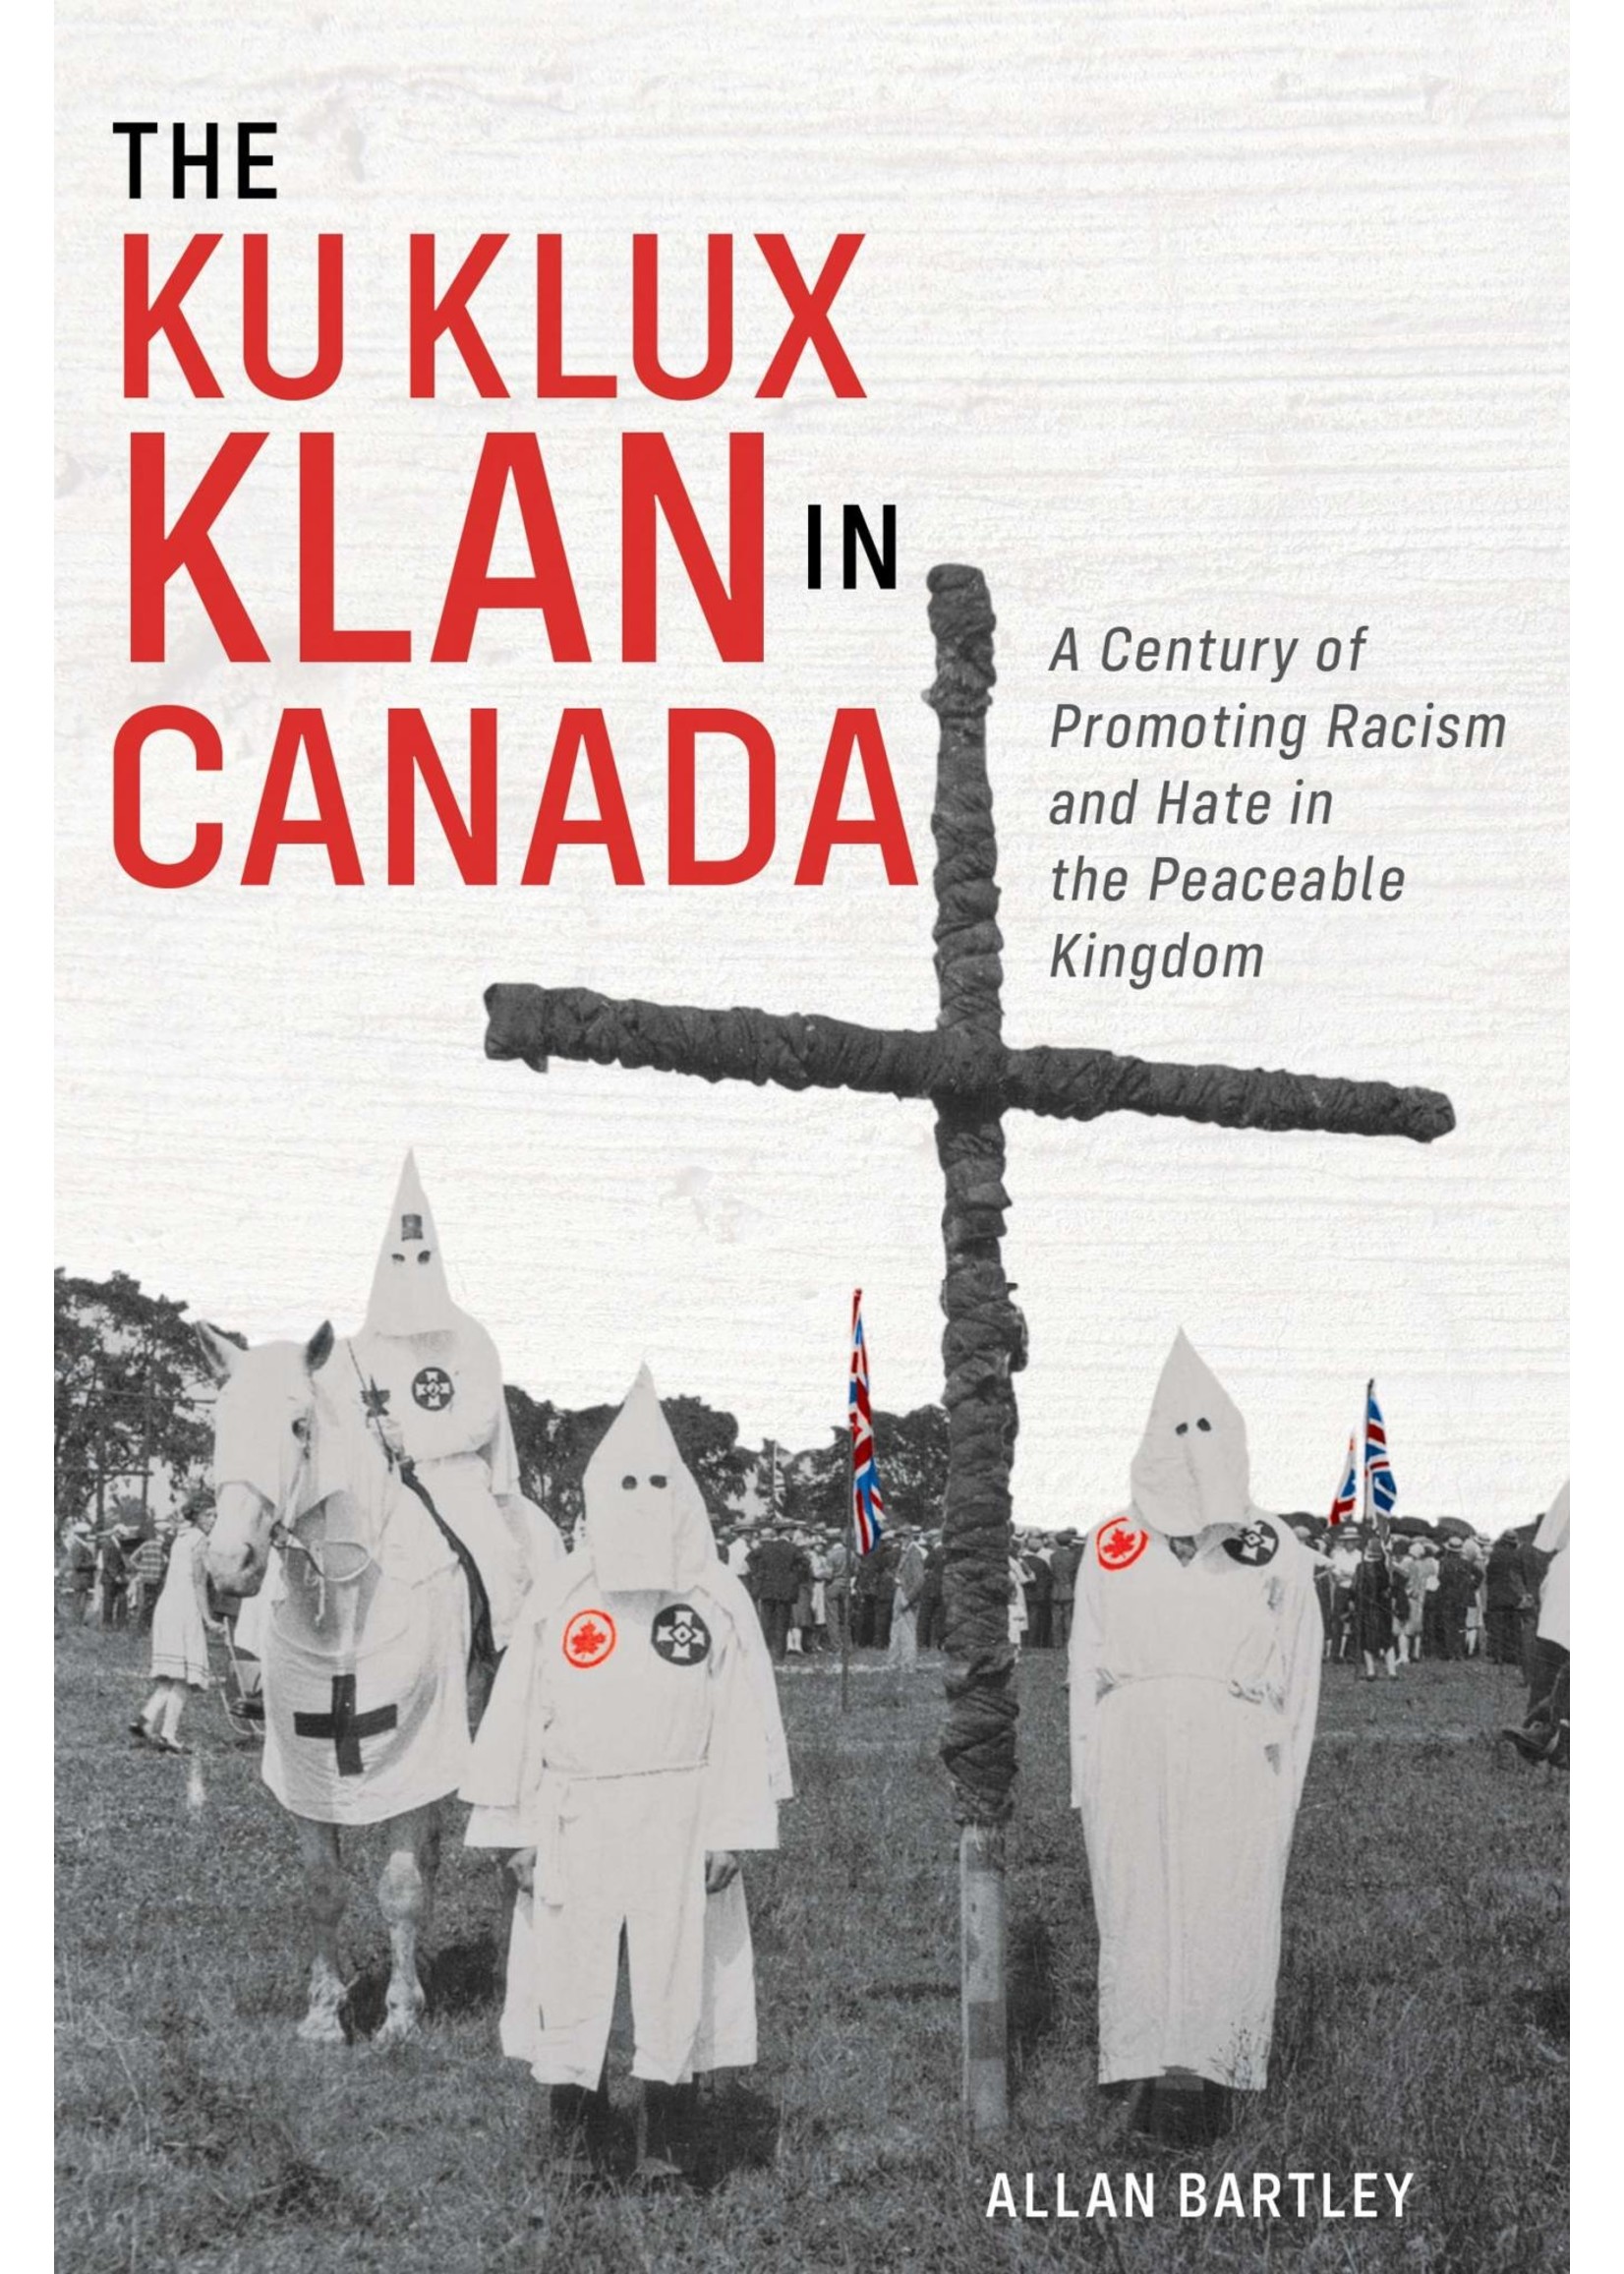 The Ku Klux Klan in Canada: A Century of Promoting Racism and Hate in the Peaceable Kingdom By Allan Bartley